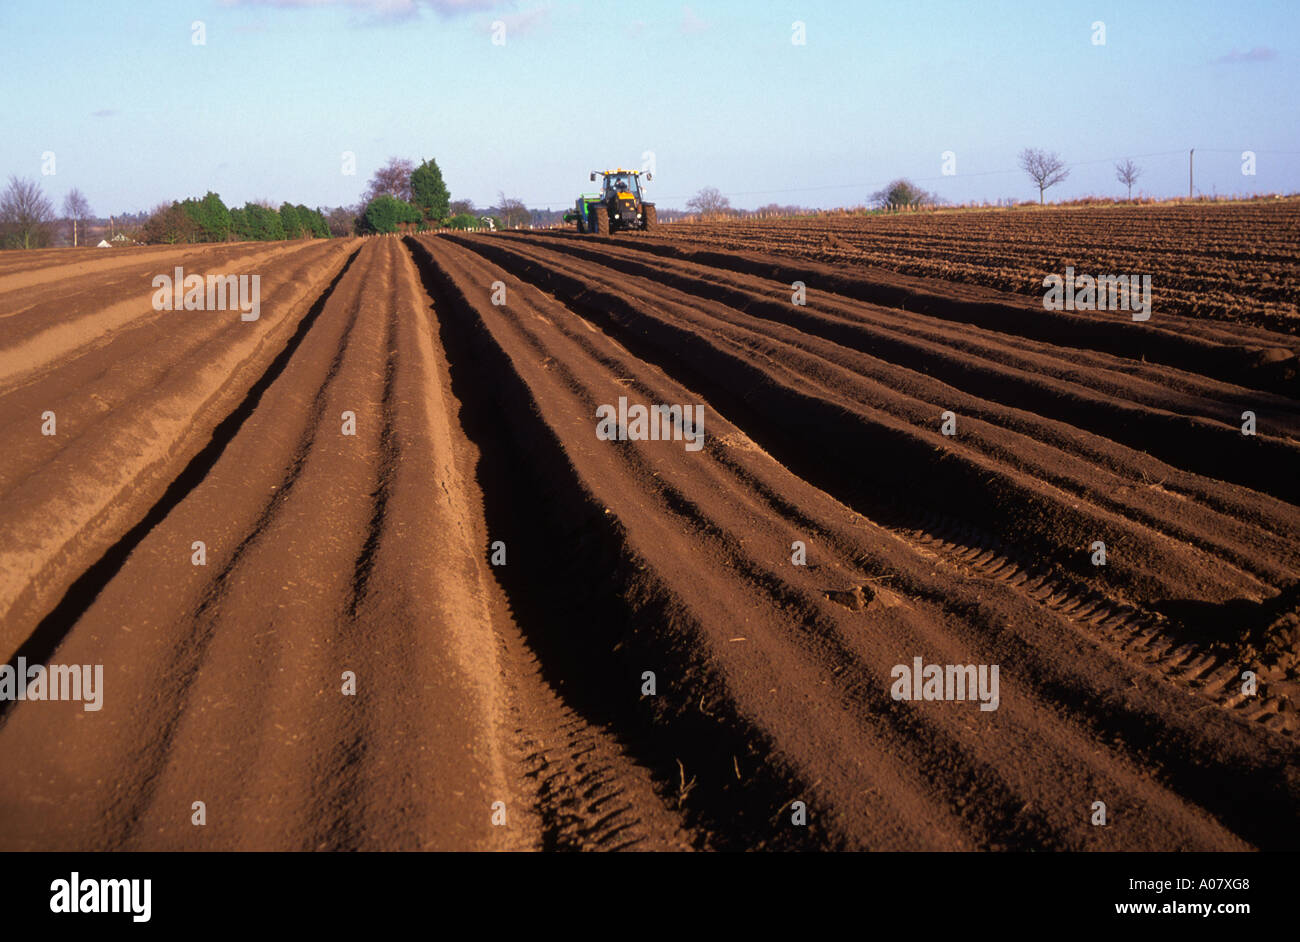 Furrows ploughed for potatoes Stock Photo